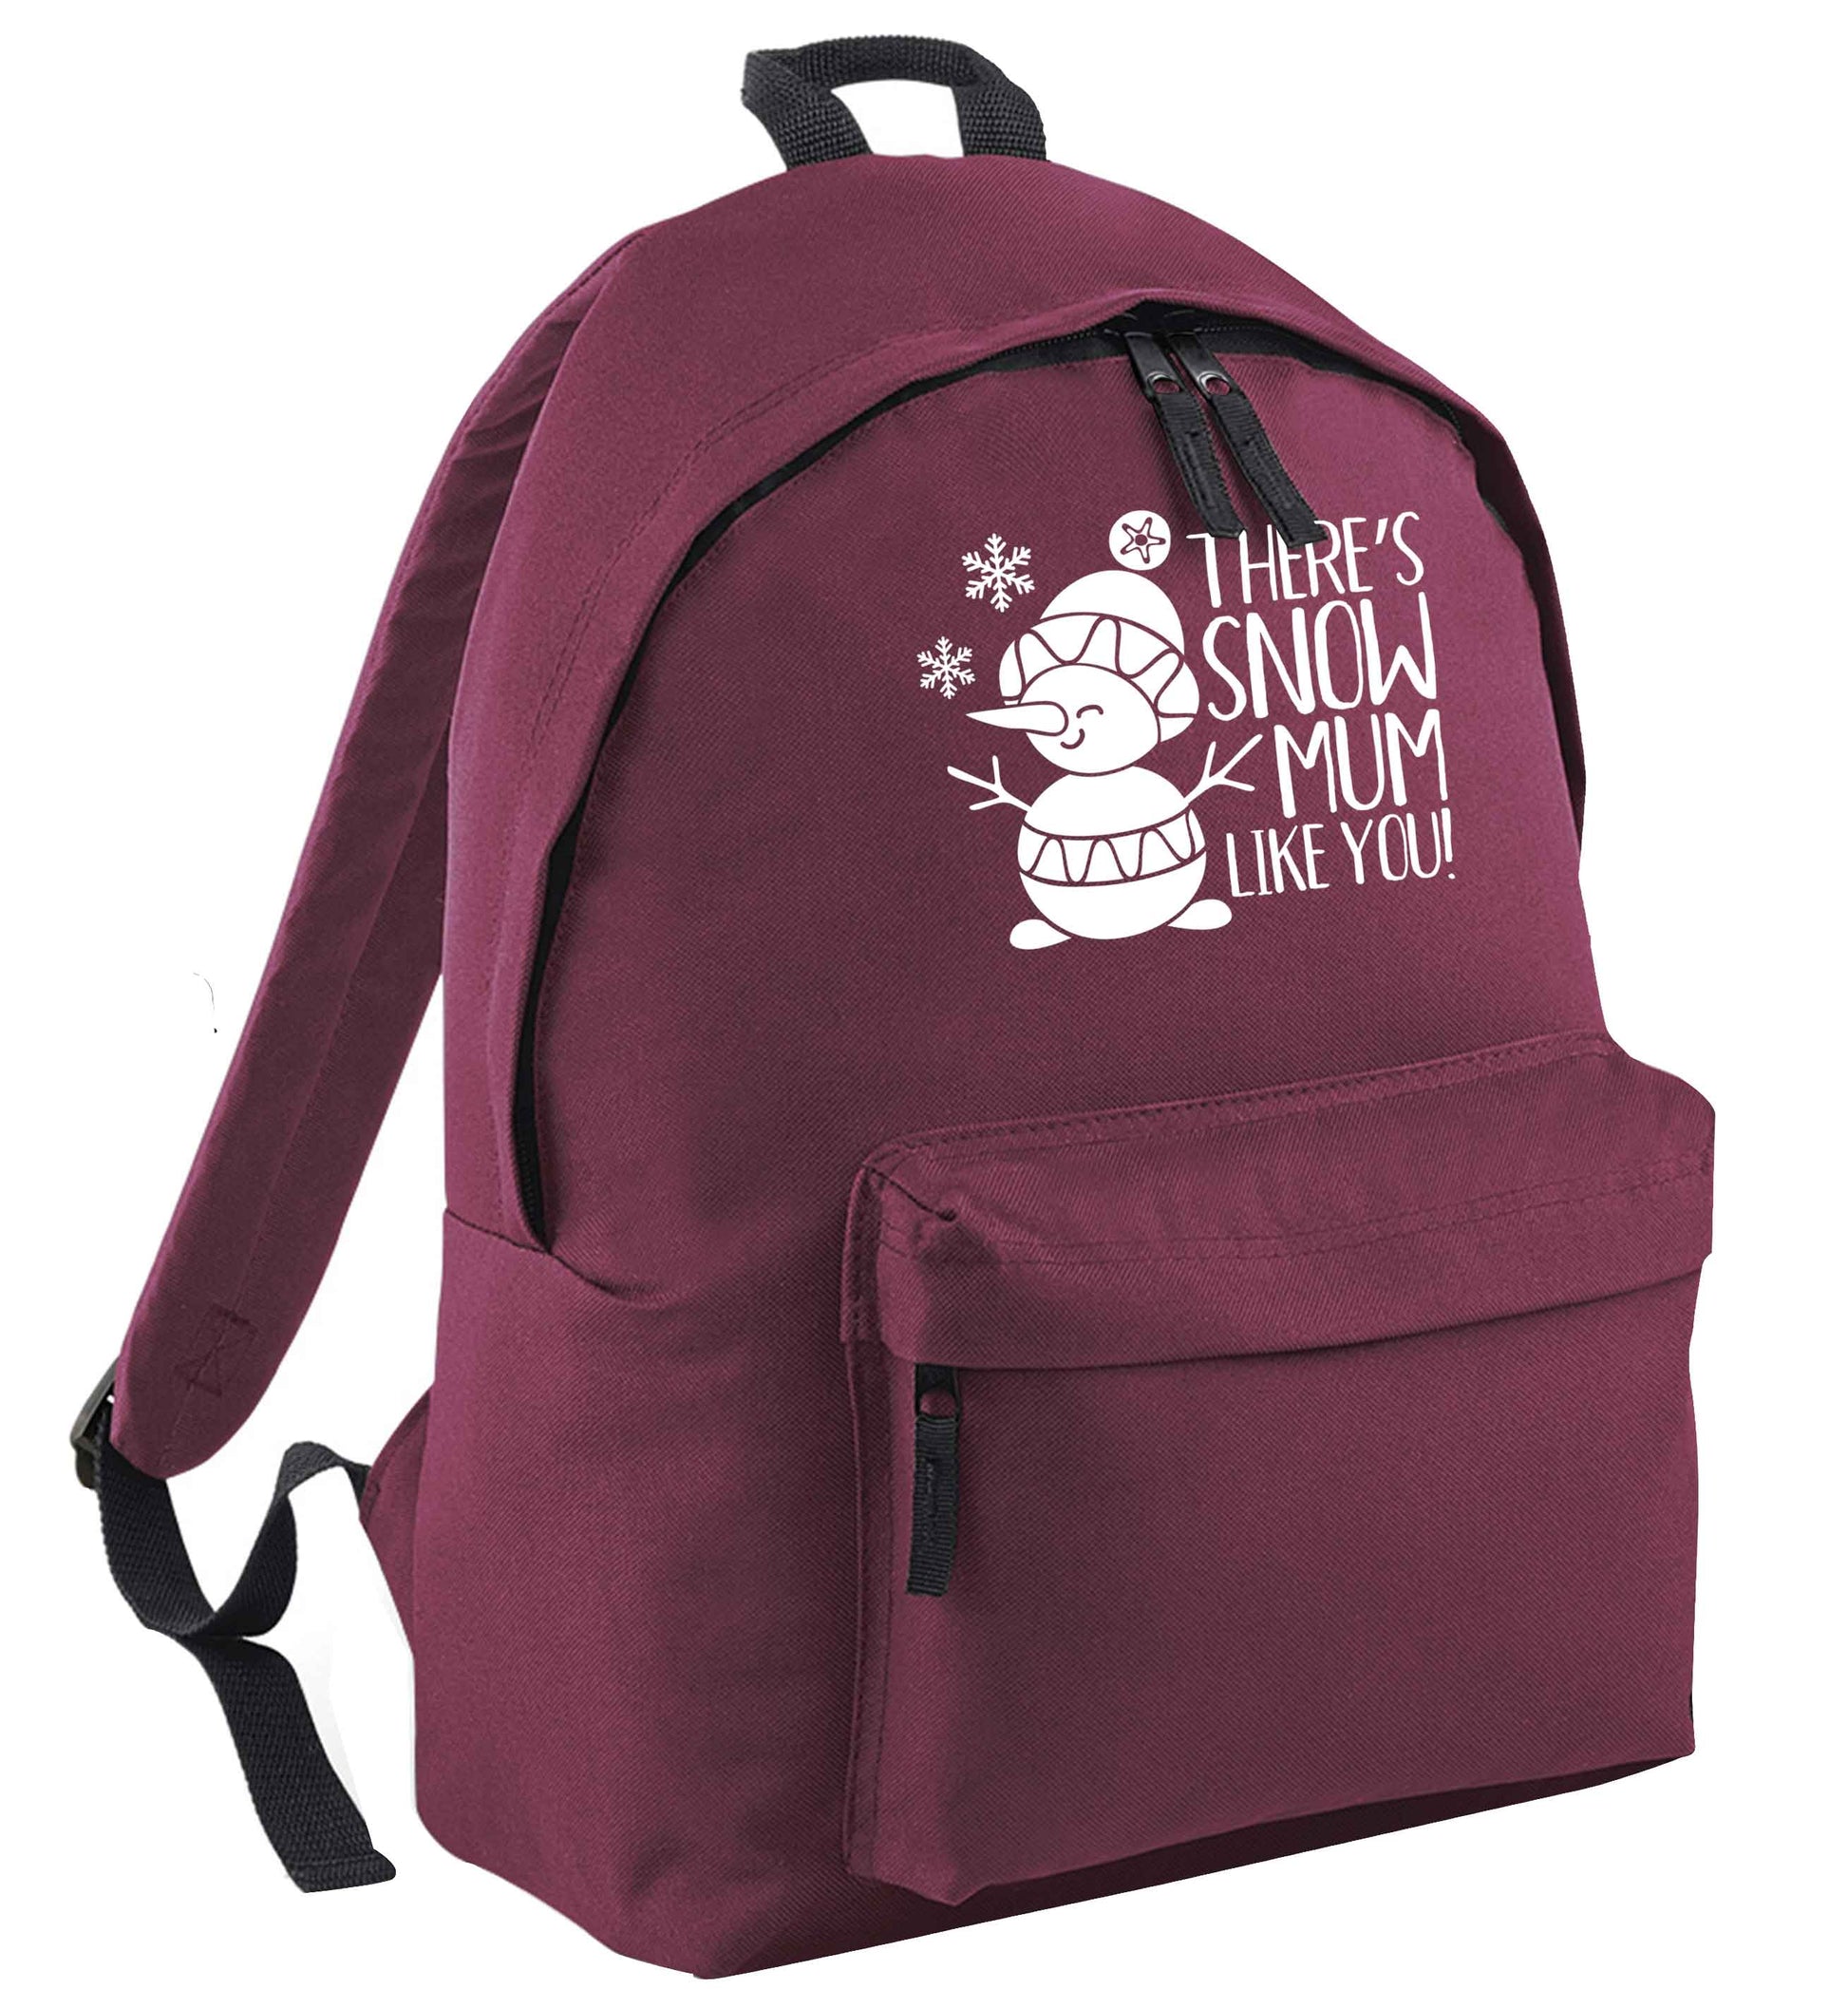 There's snow mum like you maroon adults backpack